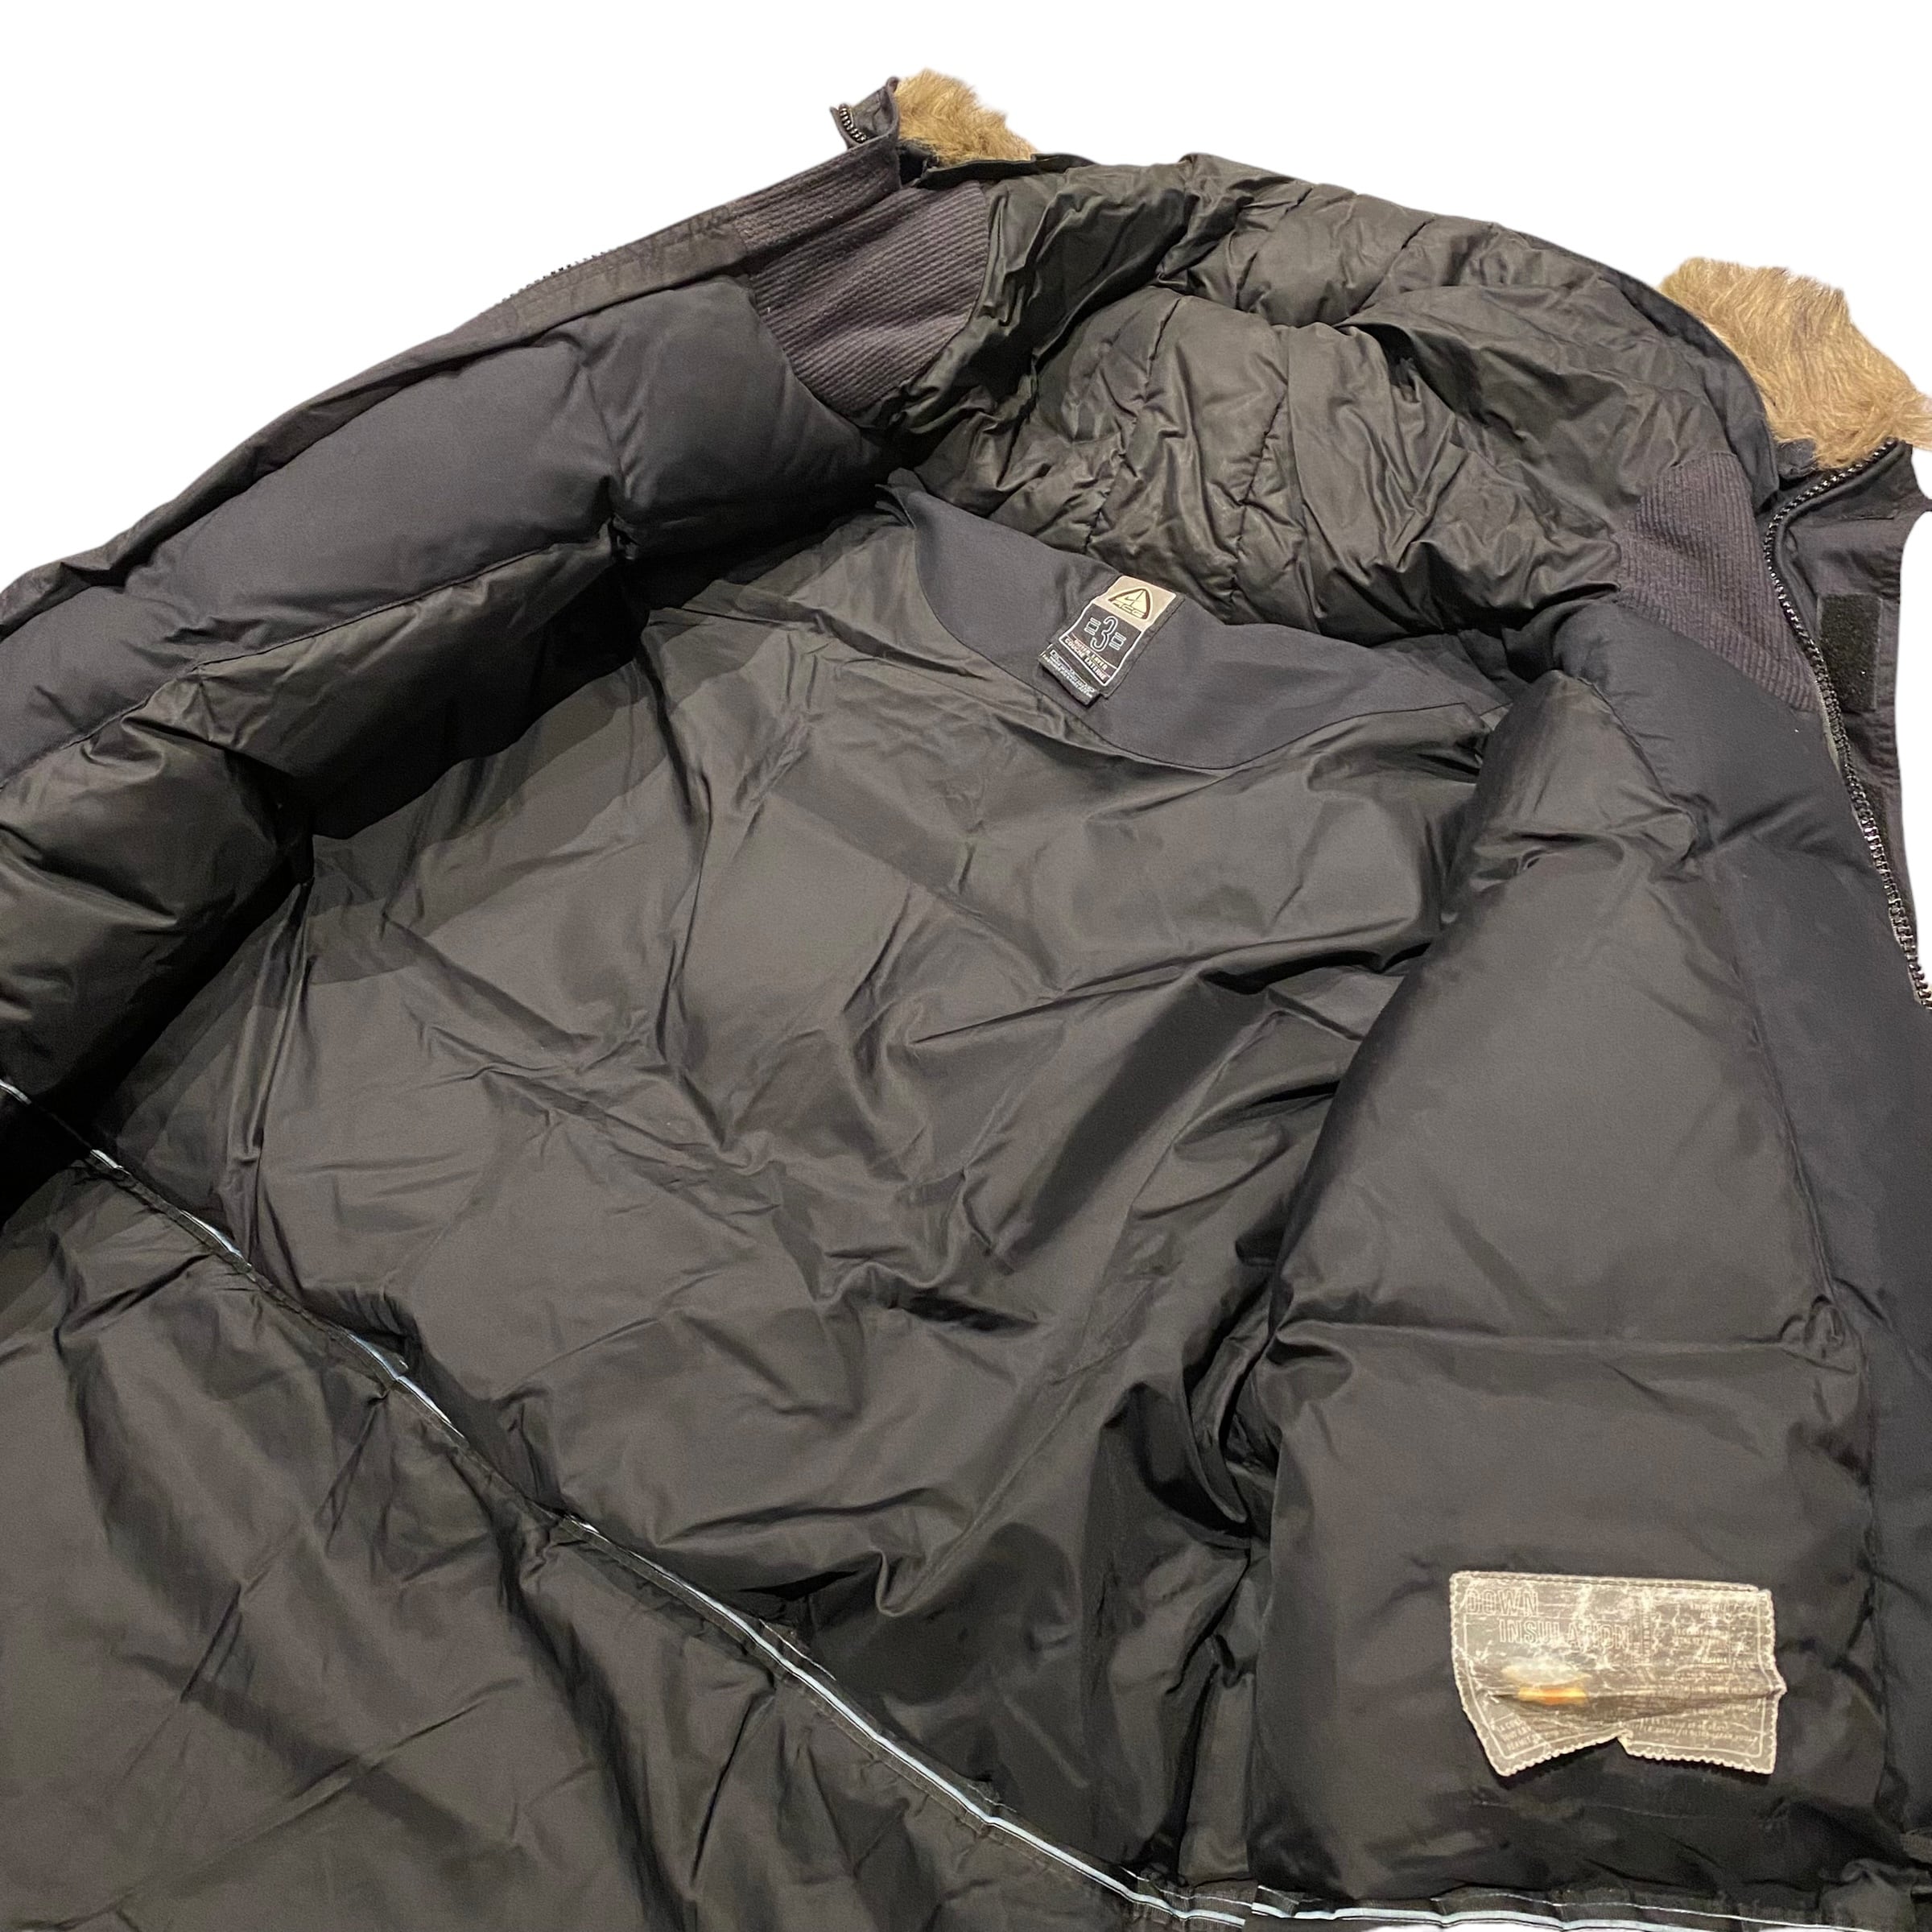 90's NIKE ACG Outer Layer 3 Down Jacket Black XL / ナイキACG